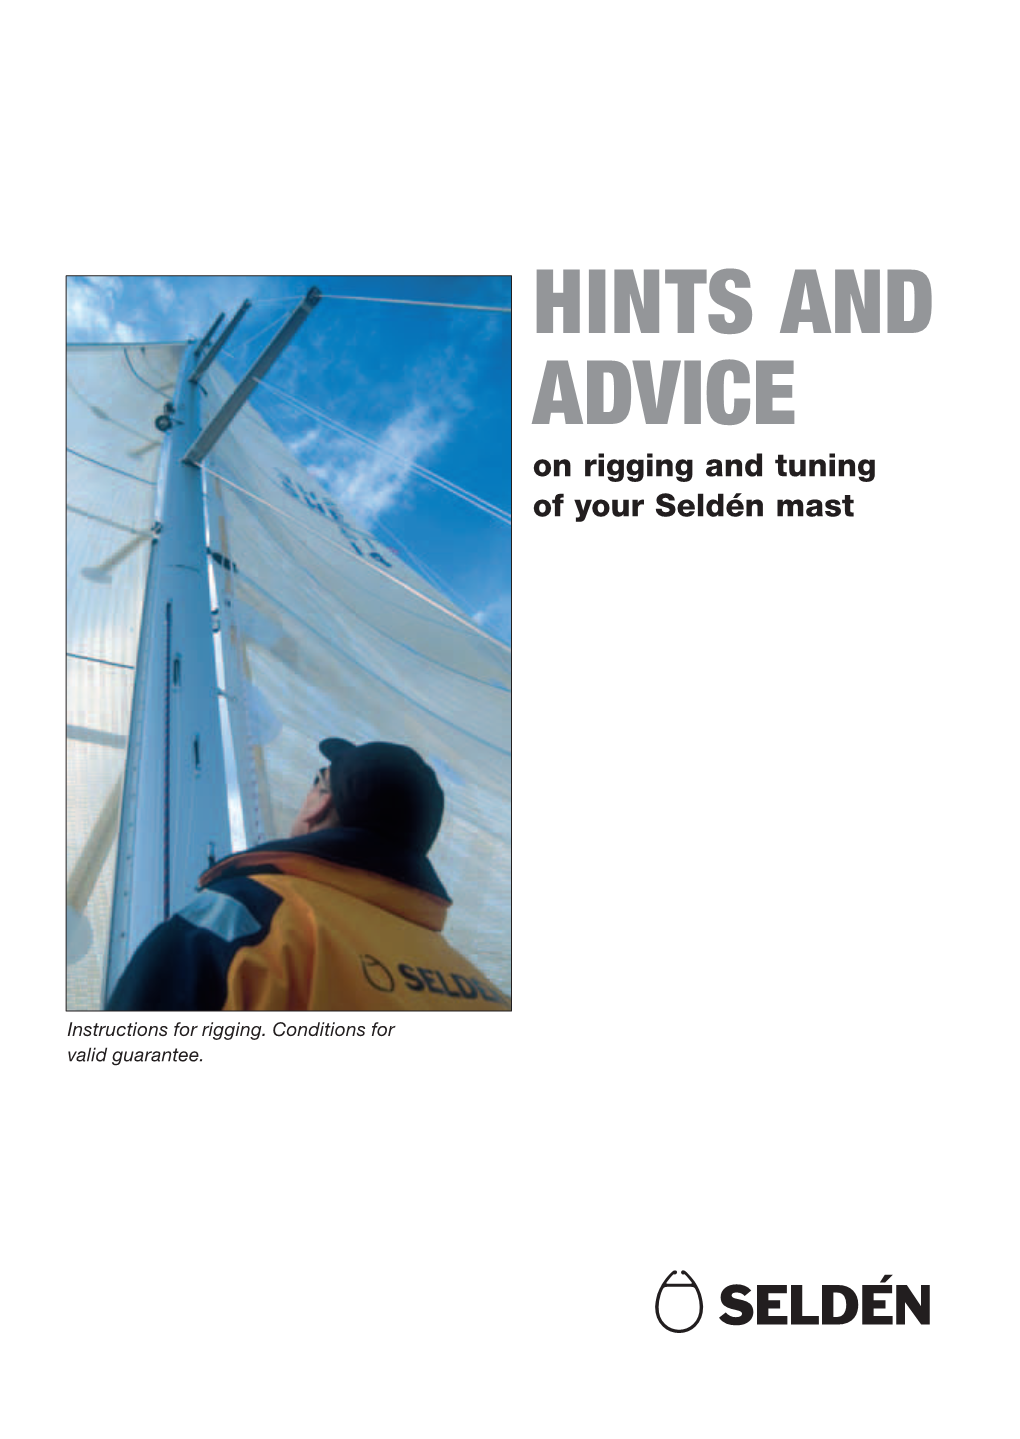 HINTS and ADVICE on Rigging and Tuning of Your Seldén Mast